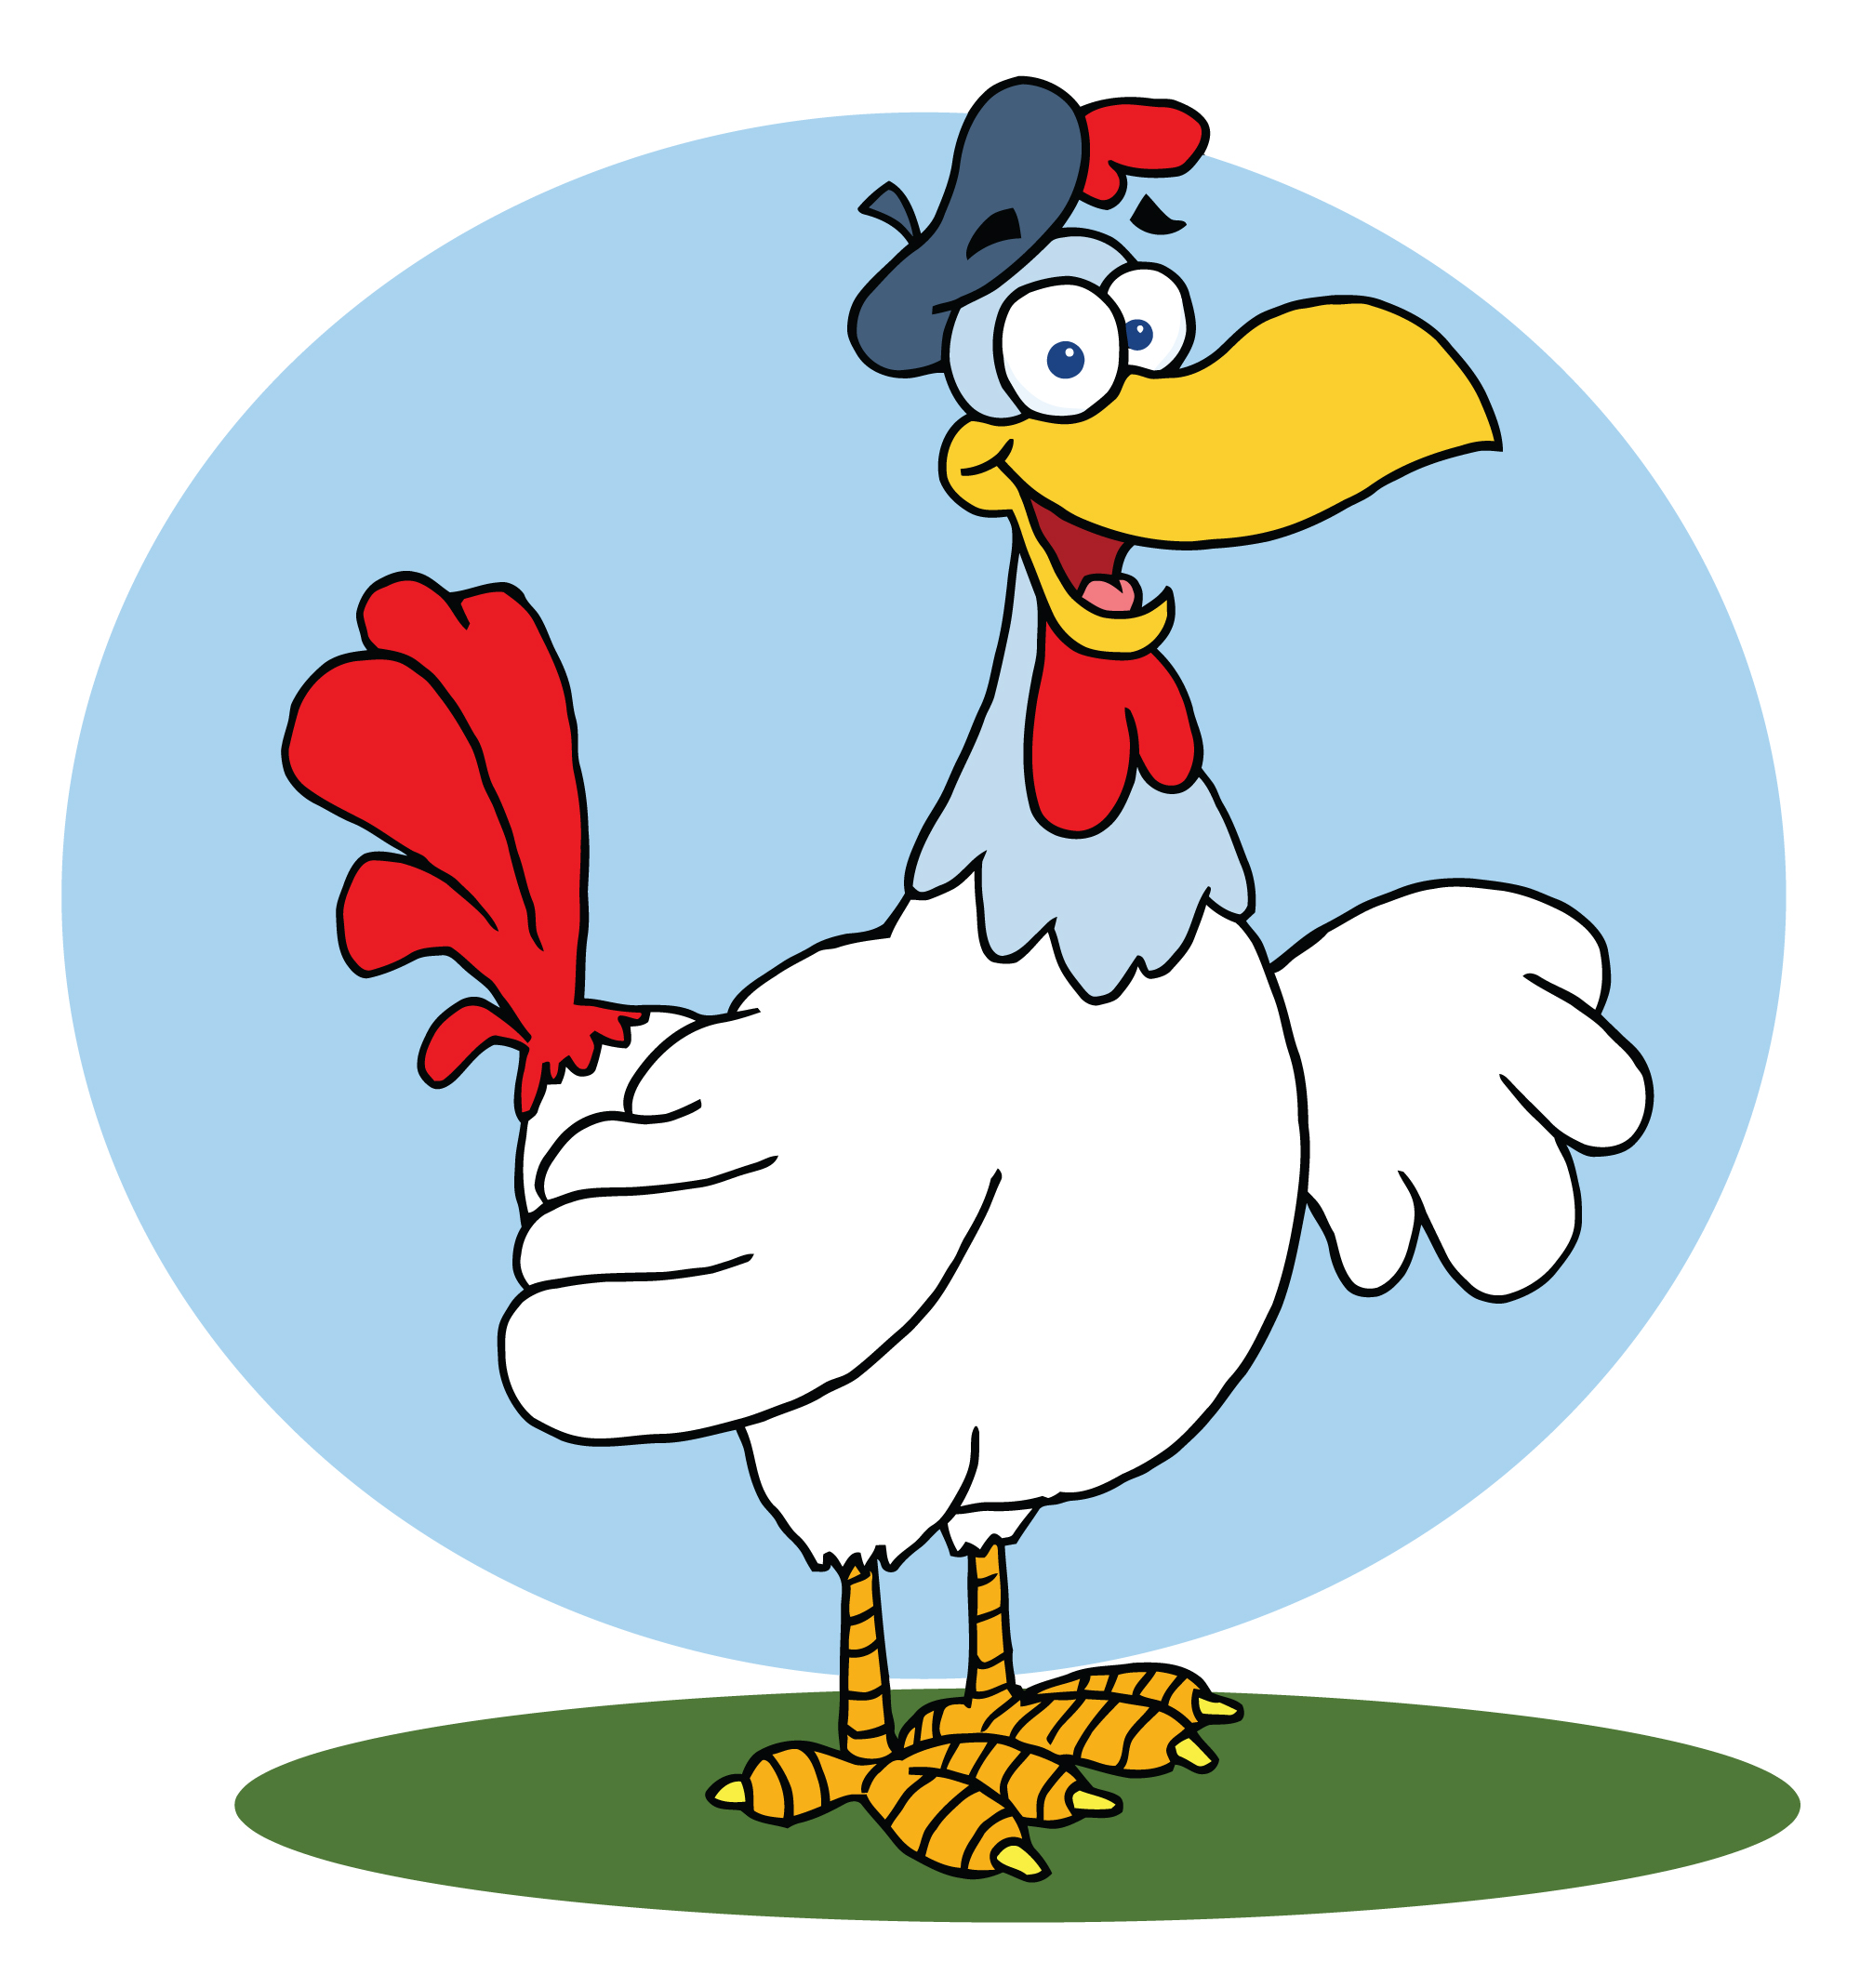 Chicken Cartoon Wallpapers HD | Download High Quality Resolution ...